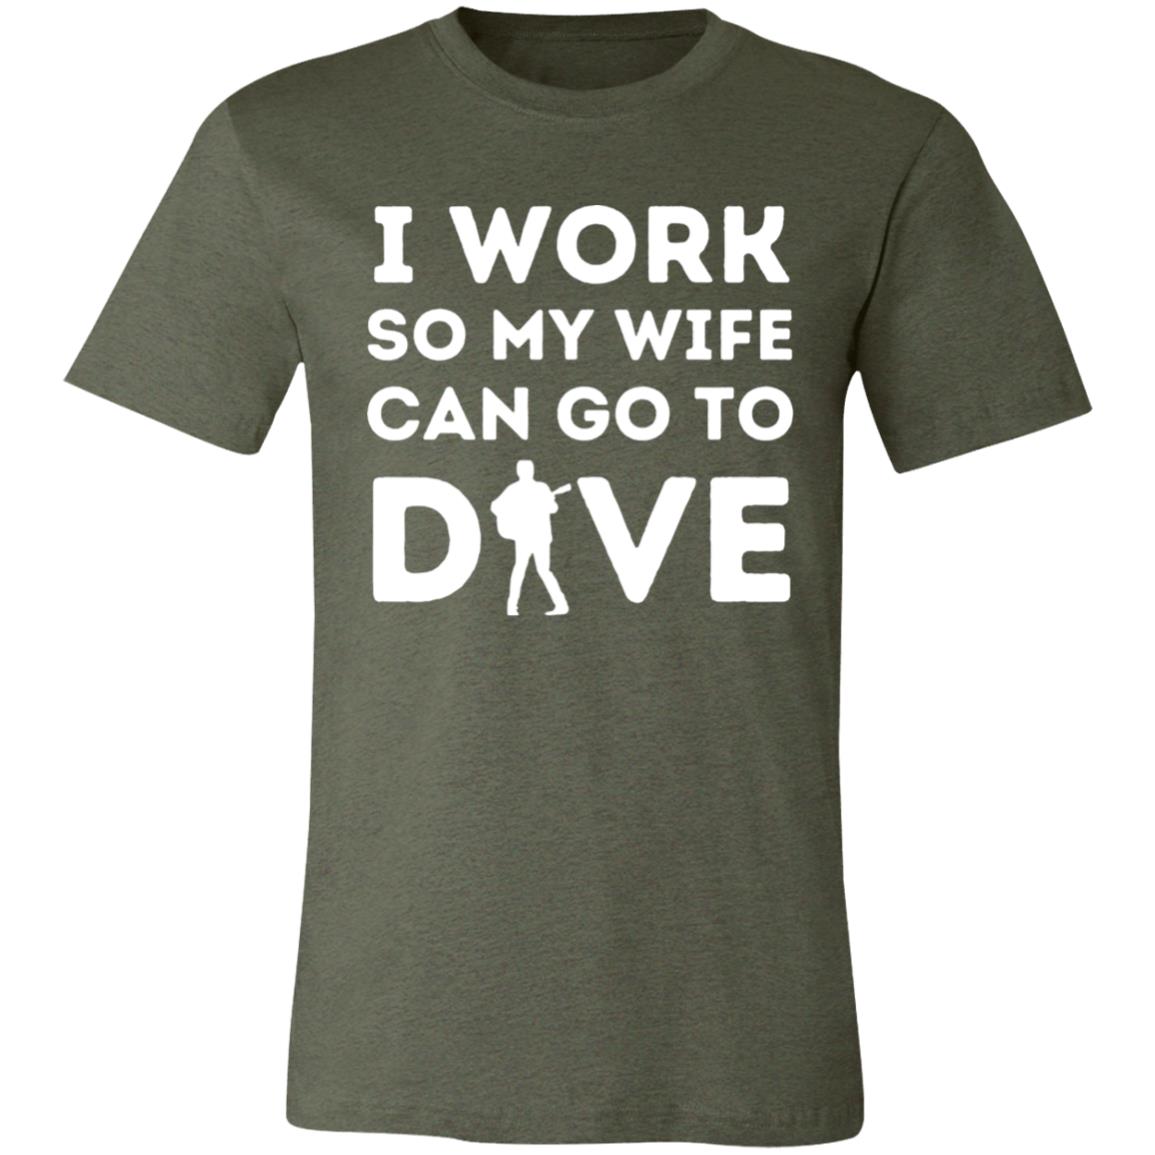 I Work So My Wife Can Go To Dave T-Shirt | Funny DMB Tour Merch